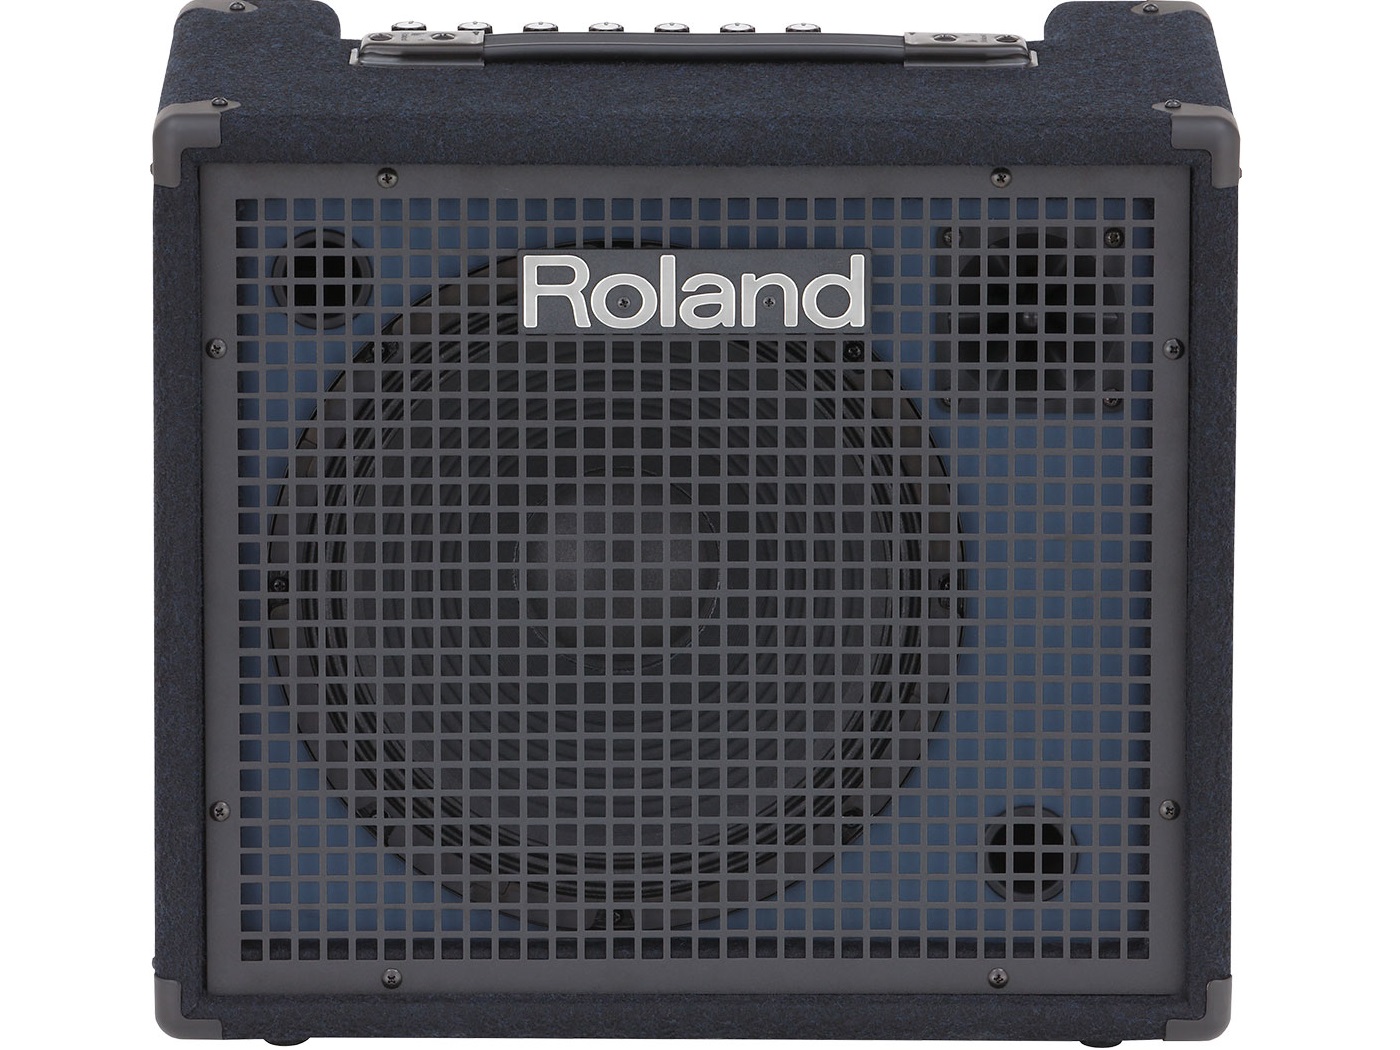 KC-200 100W 12 inch Stereo Mixing Keyboard Amplifier by Roland